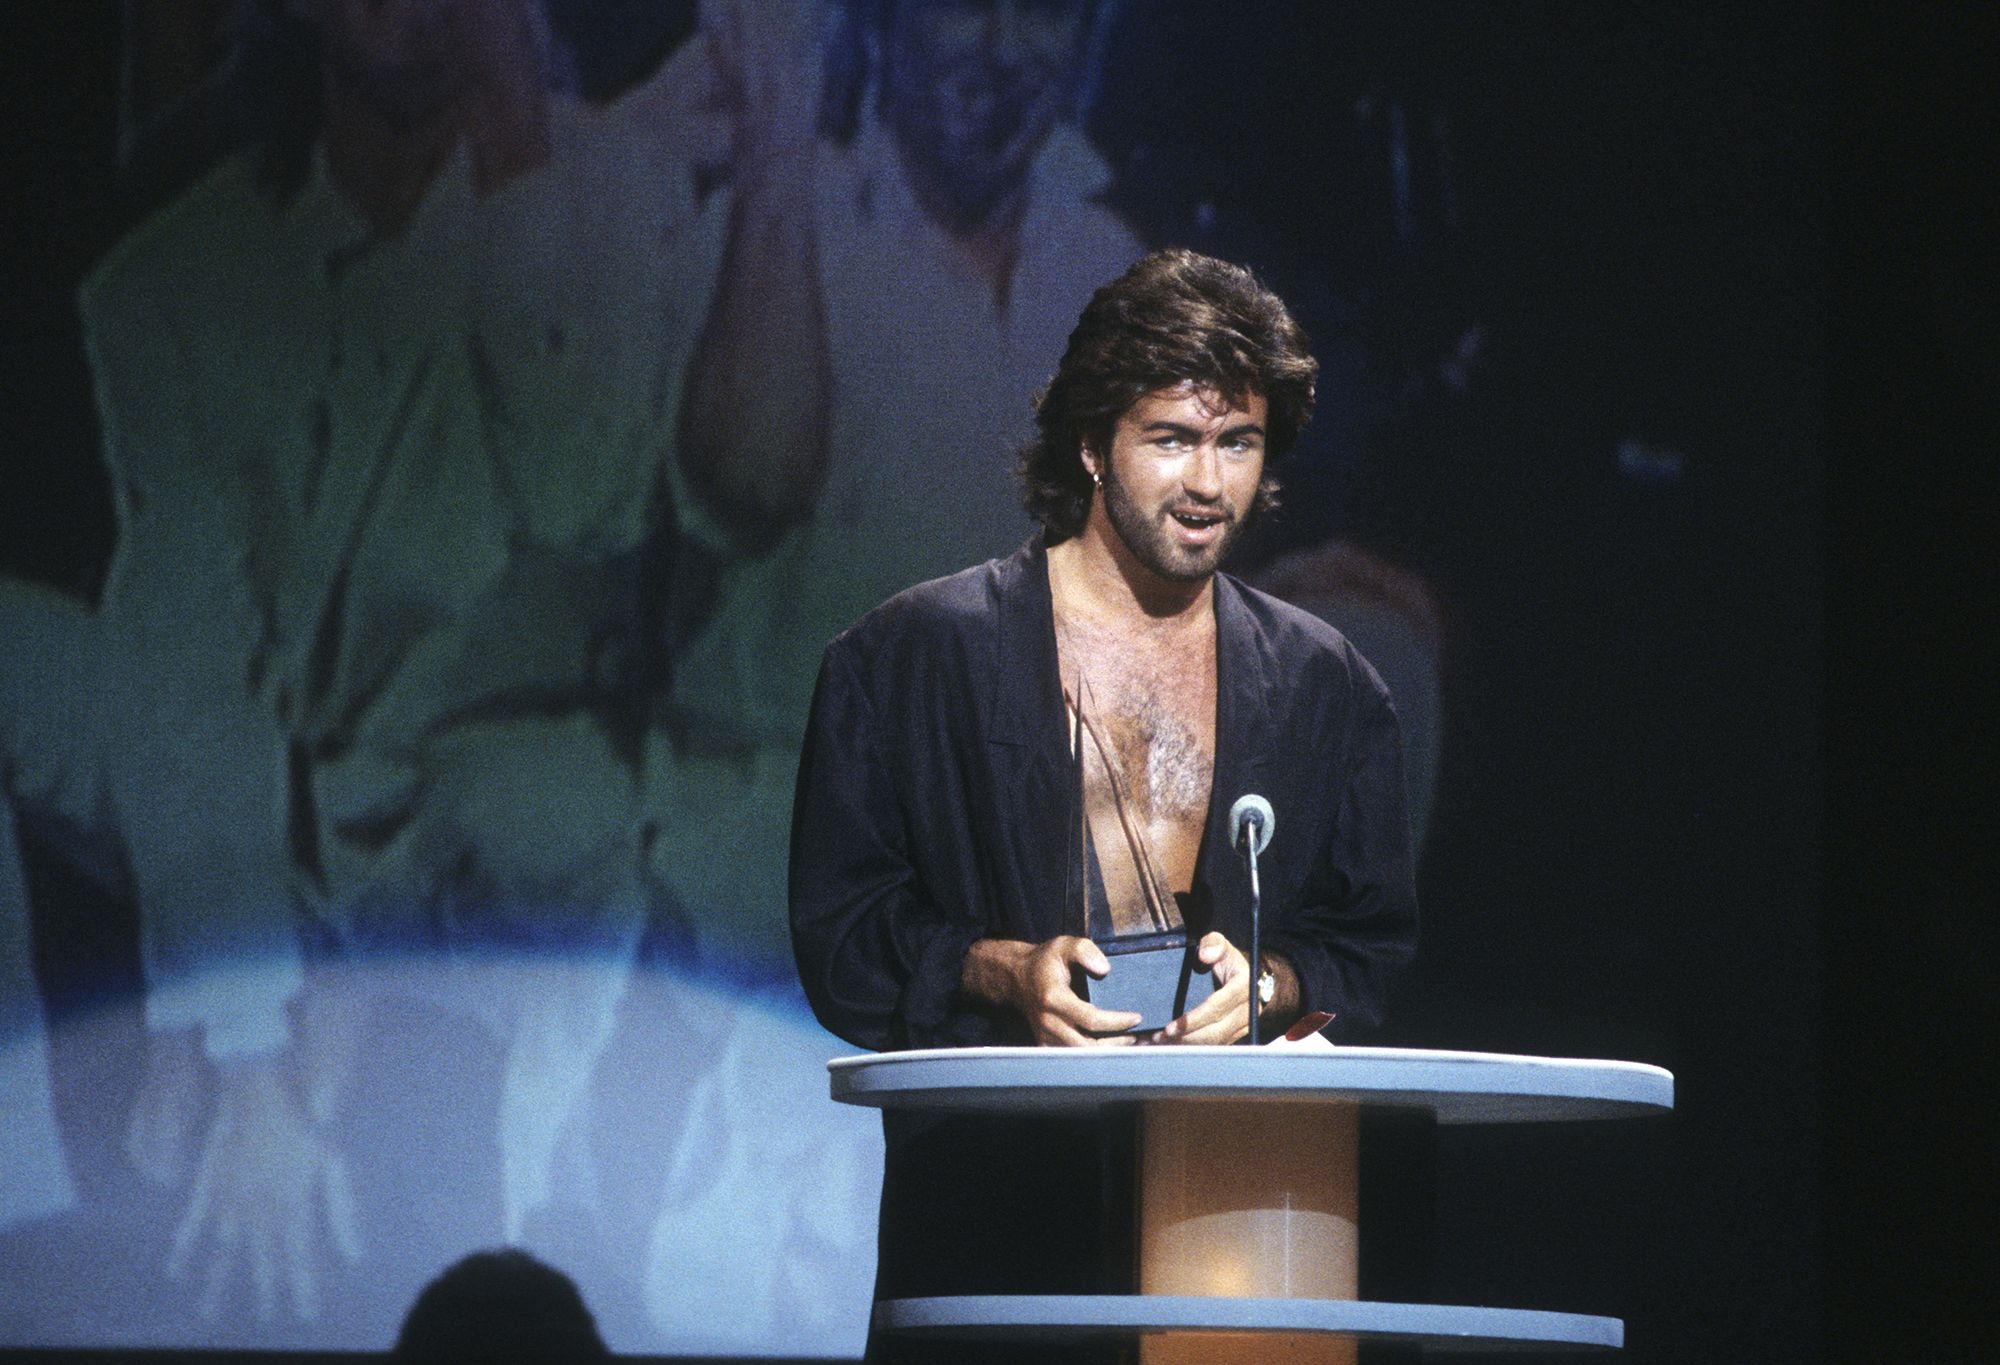 George Michael at the American Music Awards, on Jan. 27, 1986.